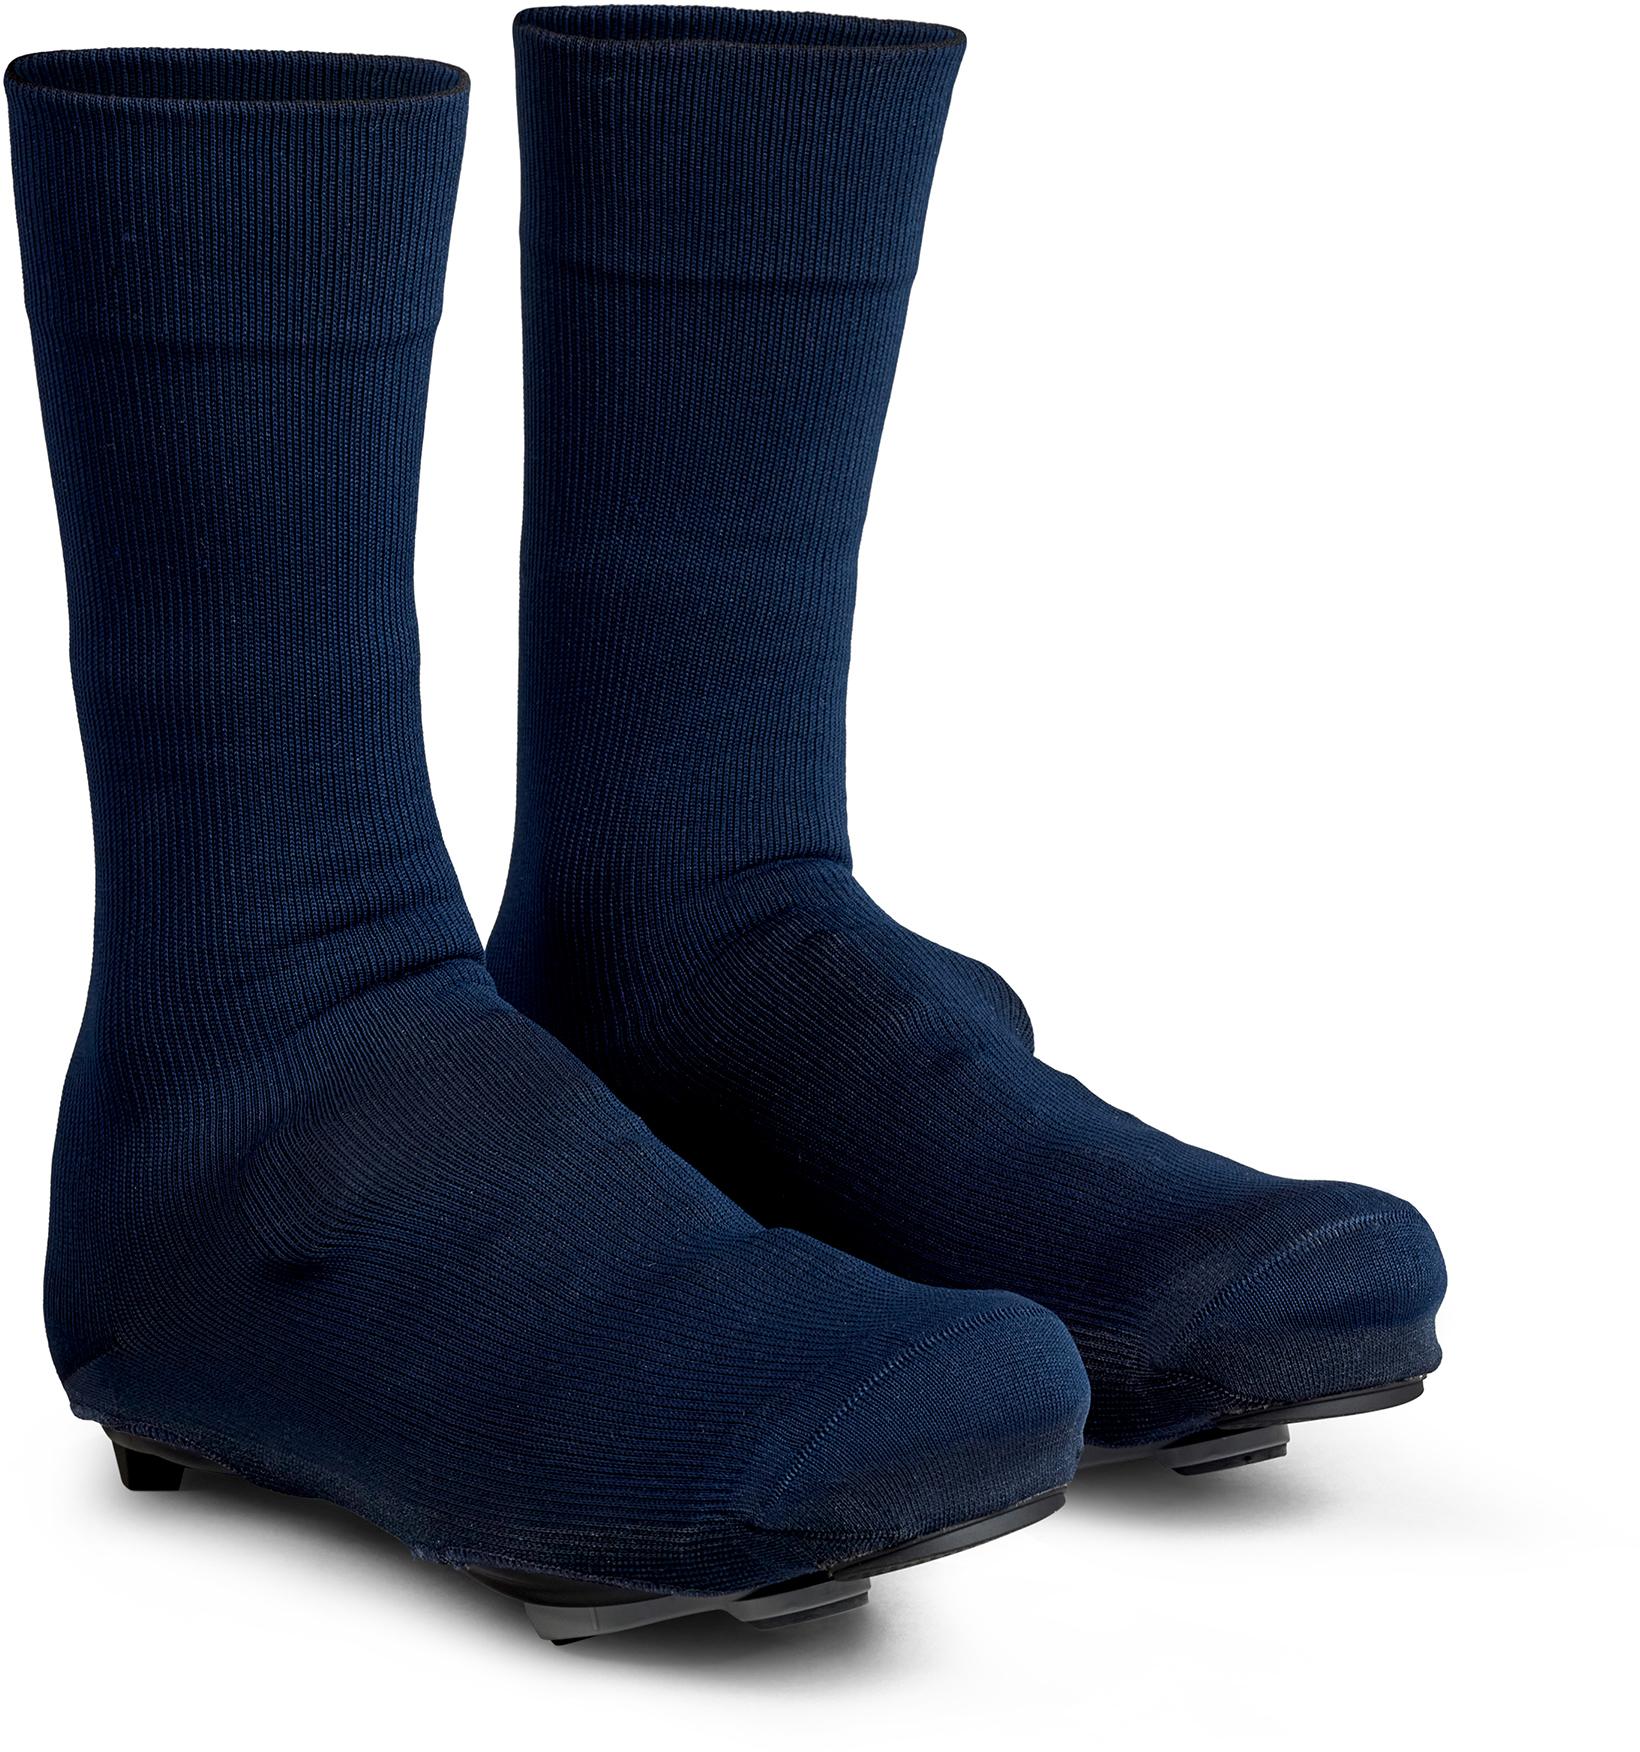 Gripgrab Flandrien Waterproof Knitted Road Shoe Covers - Navy Blue